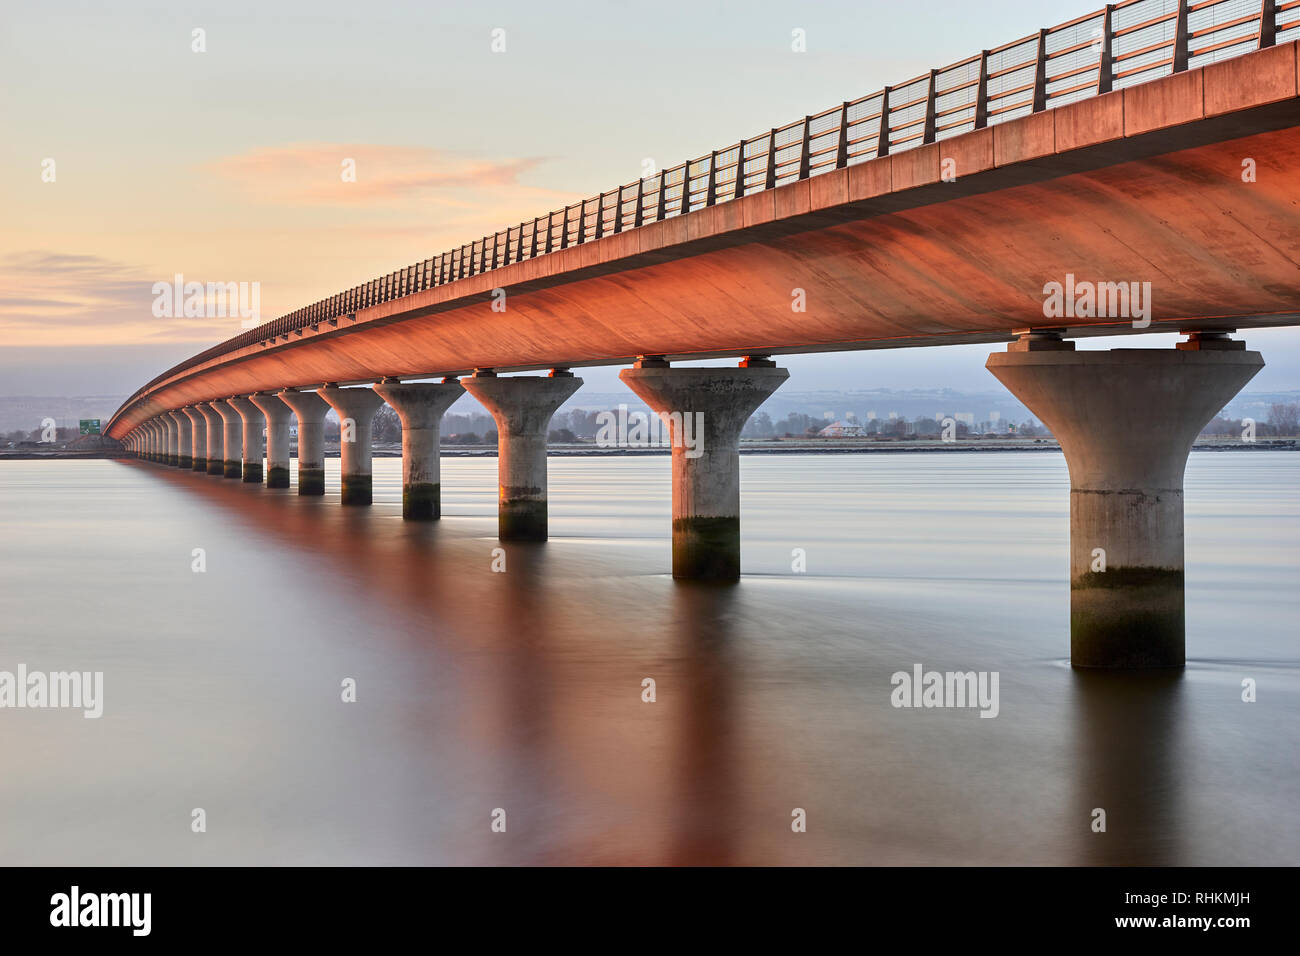 The Clackmannanshire Bridge viewed from the Fife / Clackmannanshire side, Scotland.   Long exposure Stock Photo